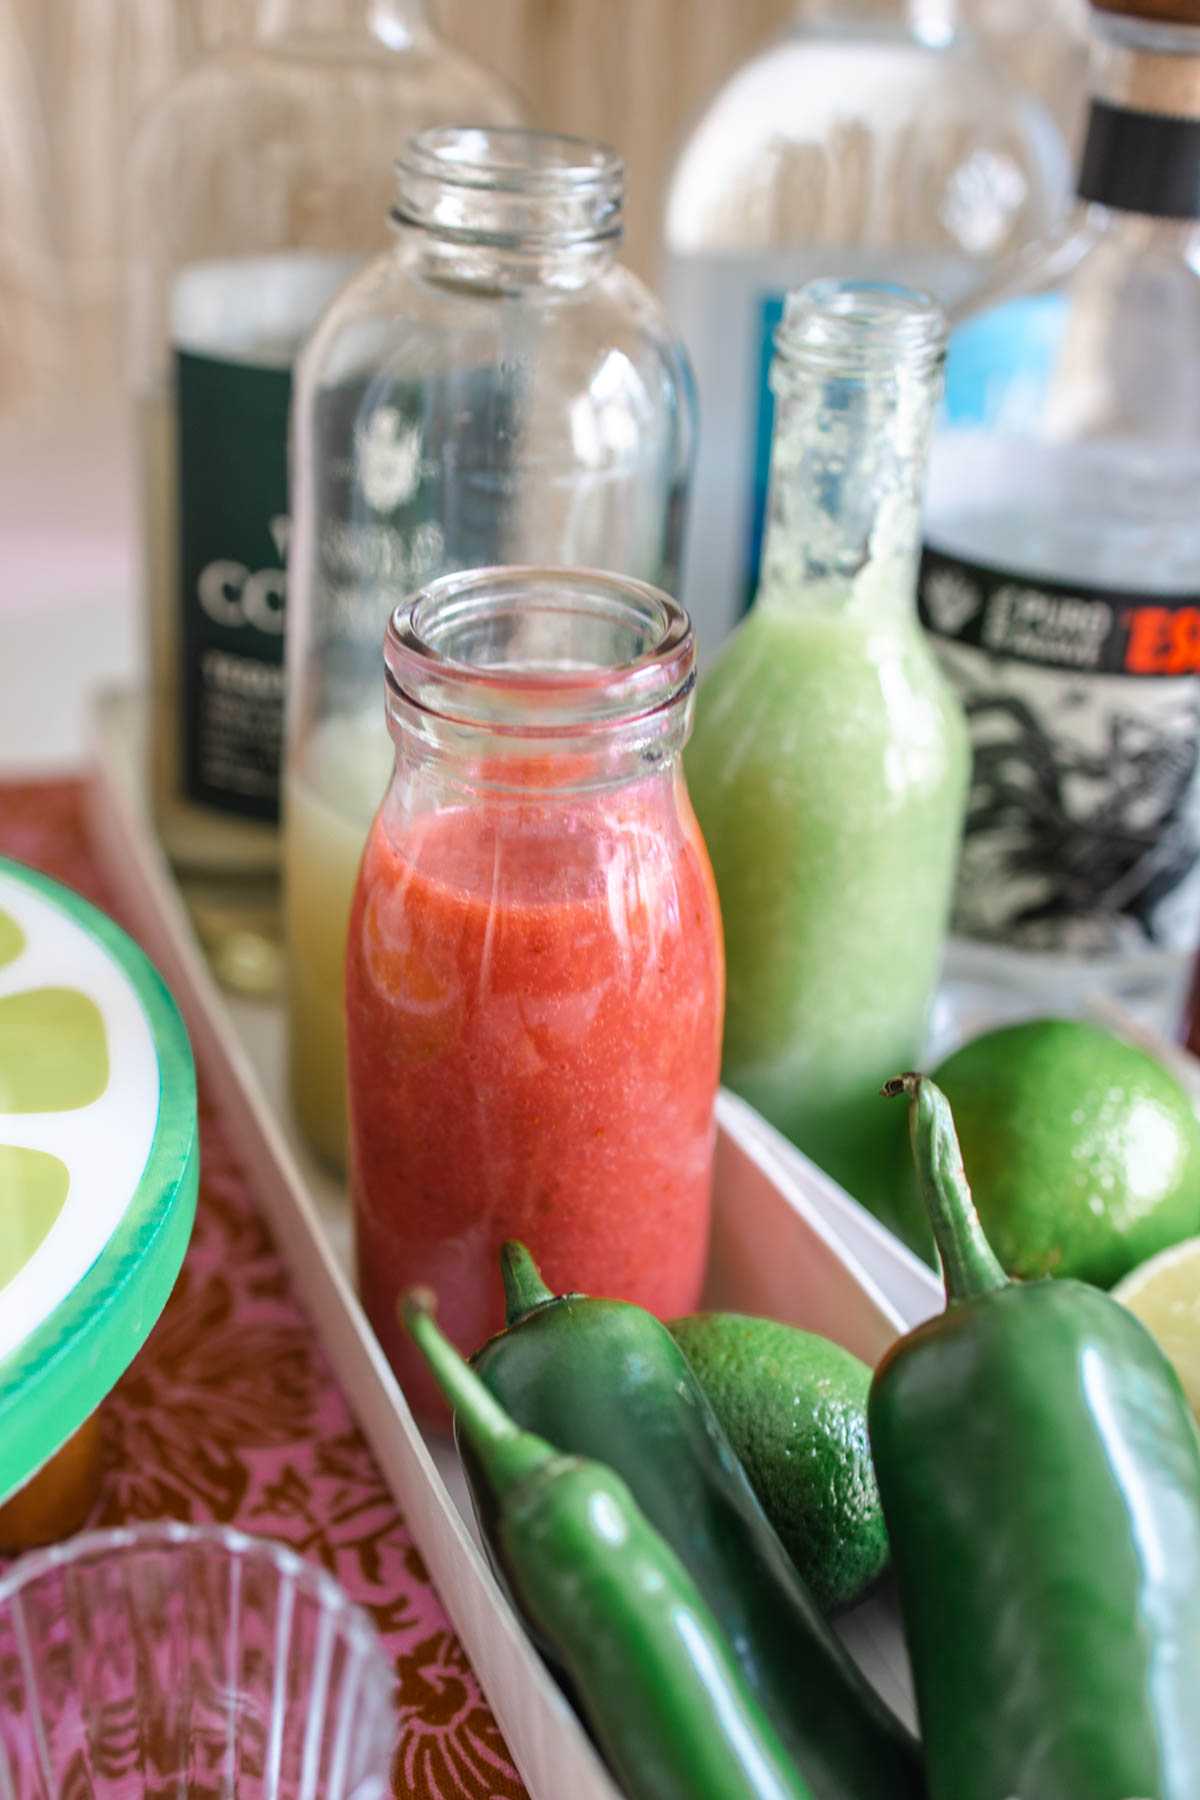 Whole jalapeno and serrano peppers in front of bottles of fruit juice and tequilas.